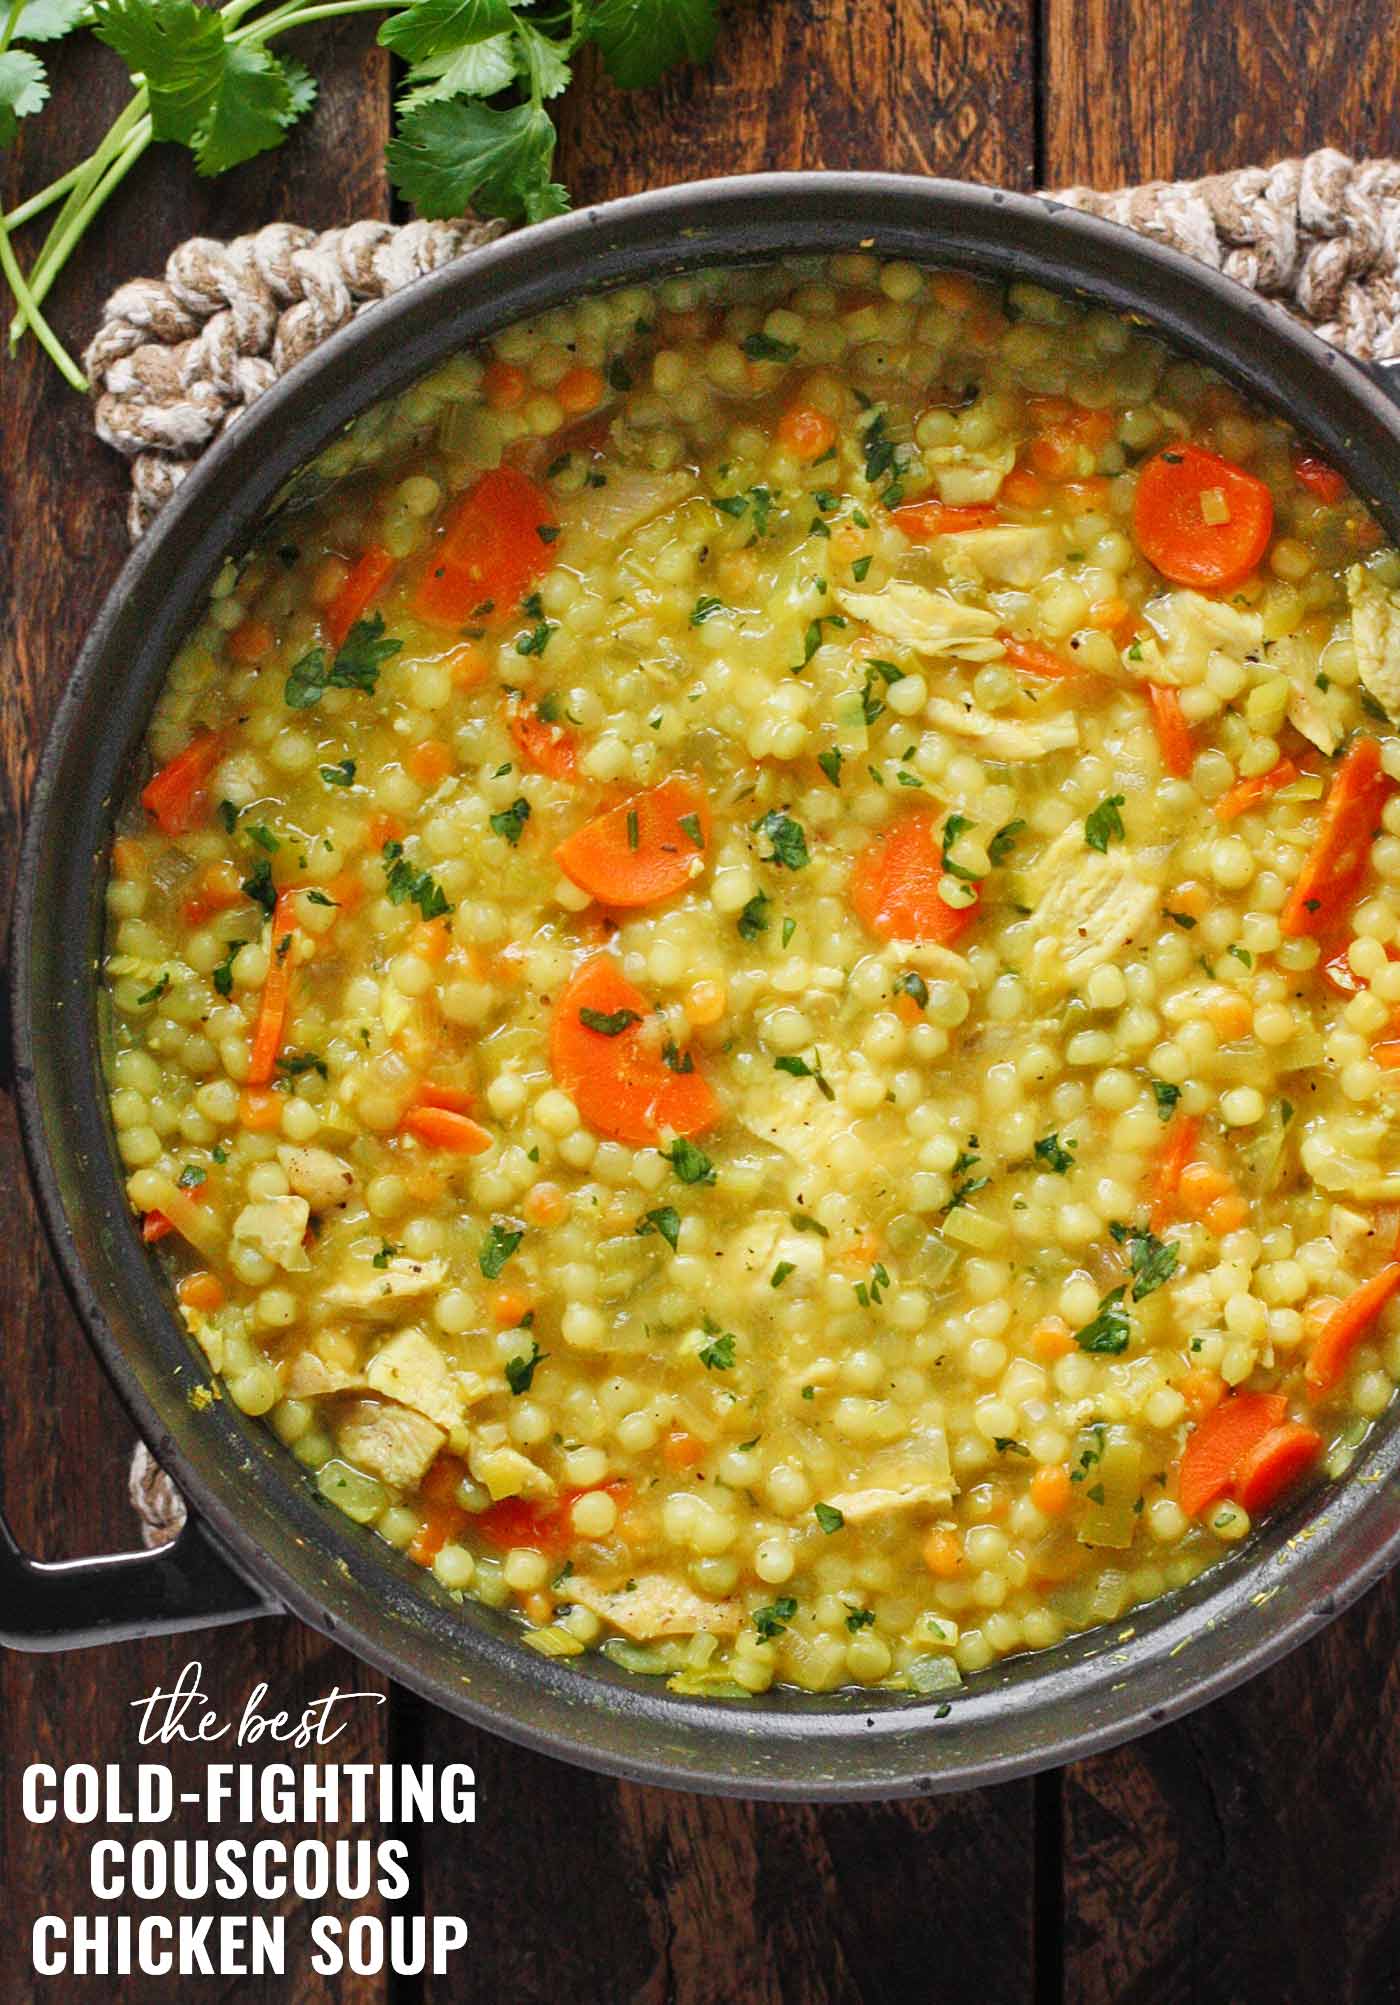 Cold-fighting couscous chicken soup